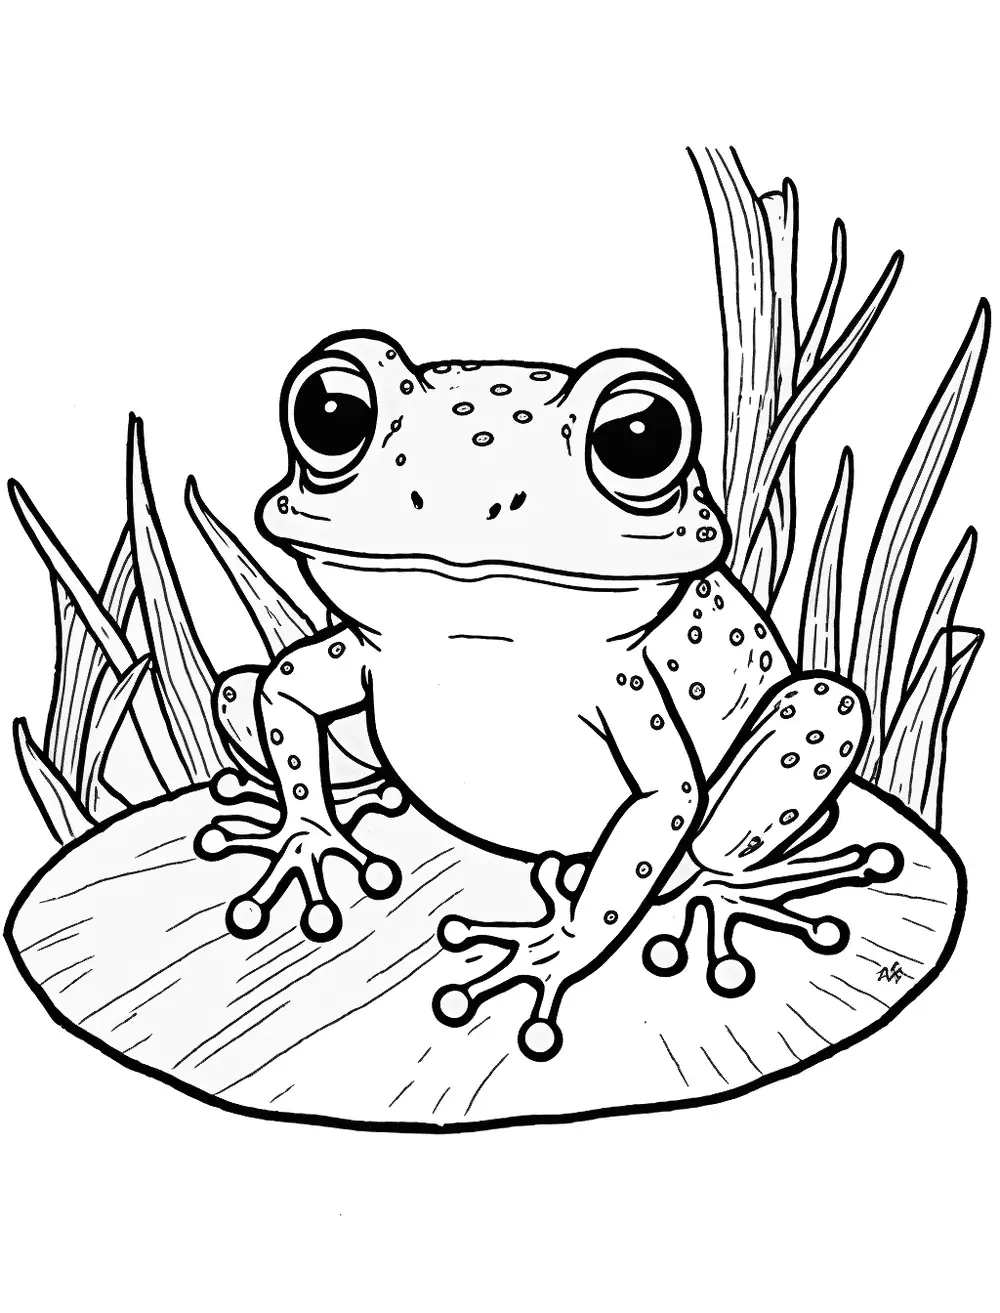 Small Baby Frog Coloring Page - A tiny, newly hatched frog.